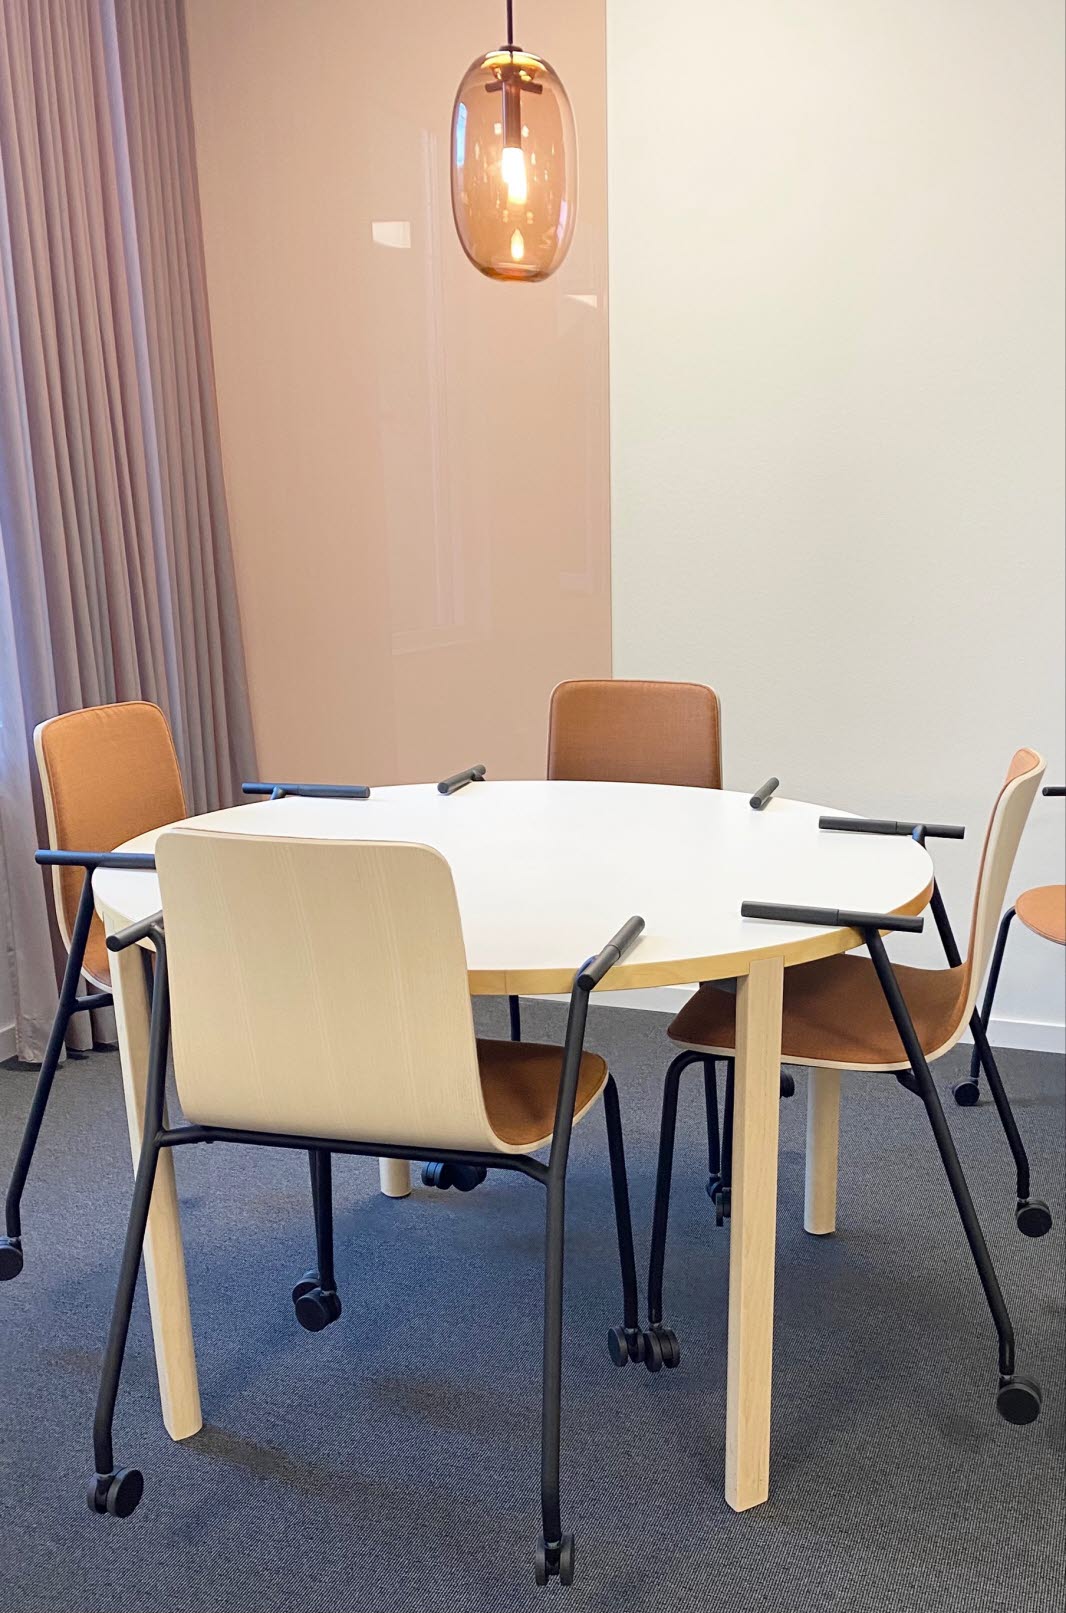 Table with four chairs. Above the table hangs an orange lamp in a drop shape.